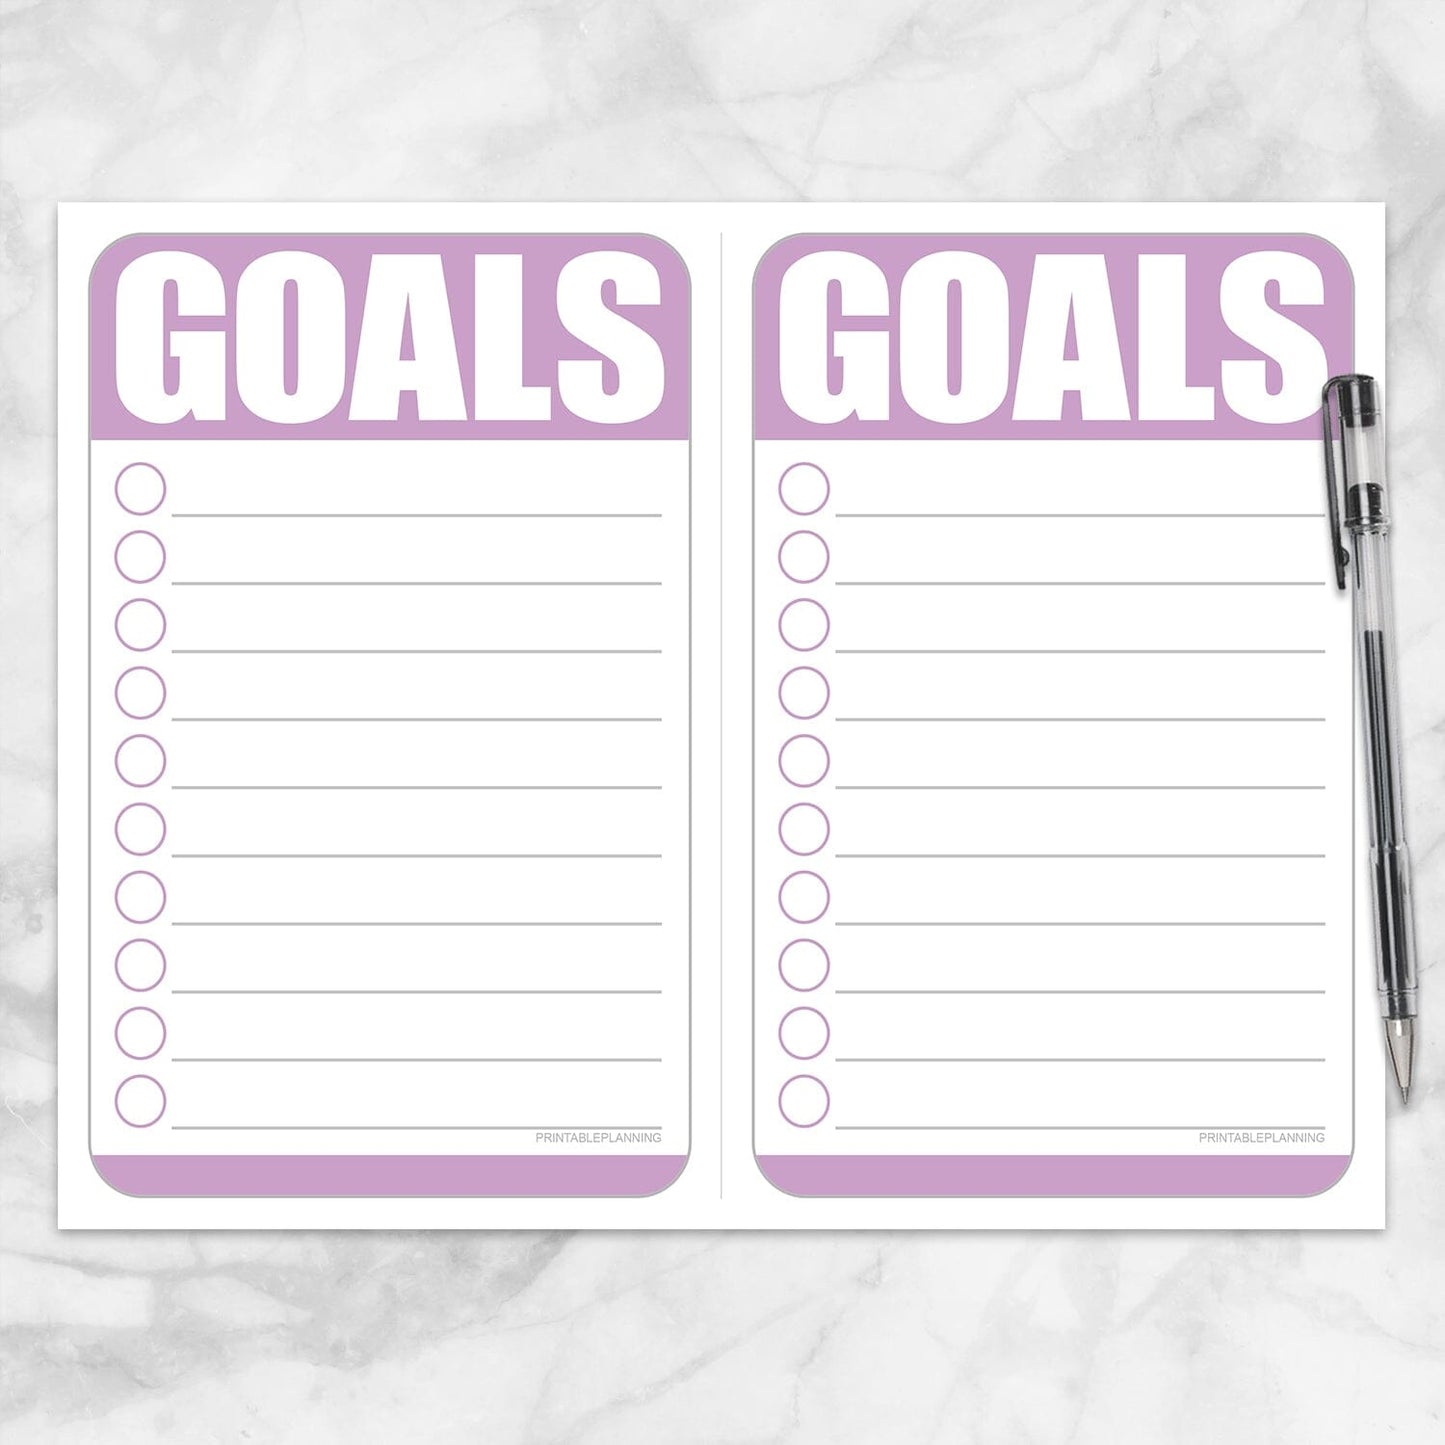 Printable Goals - Purple Sheet of two Half Page Checklists at Printable Planning.